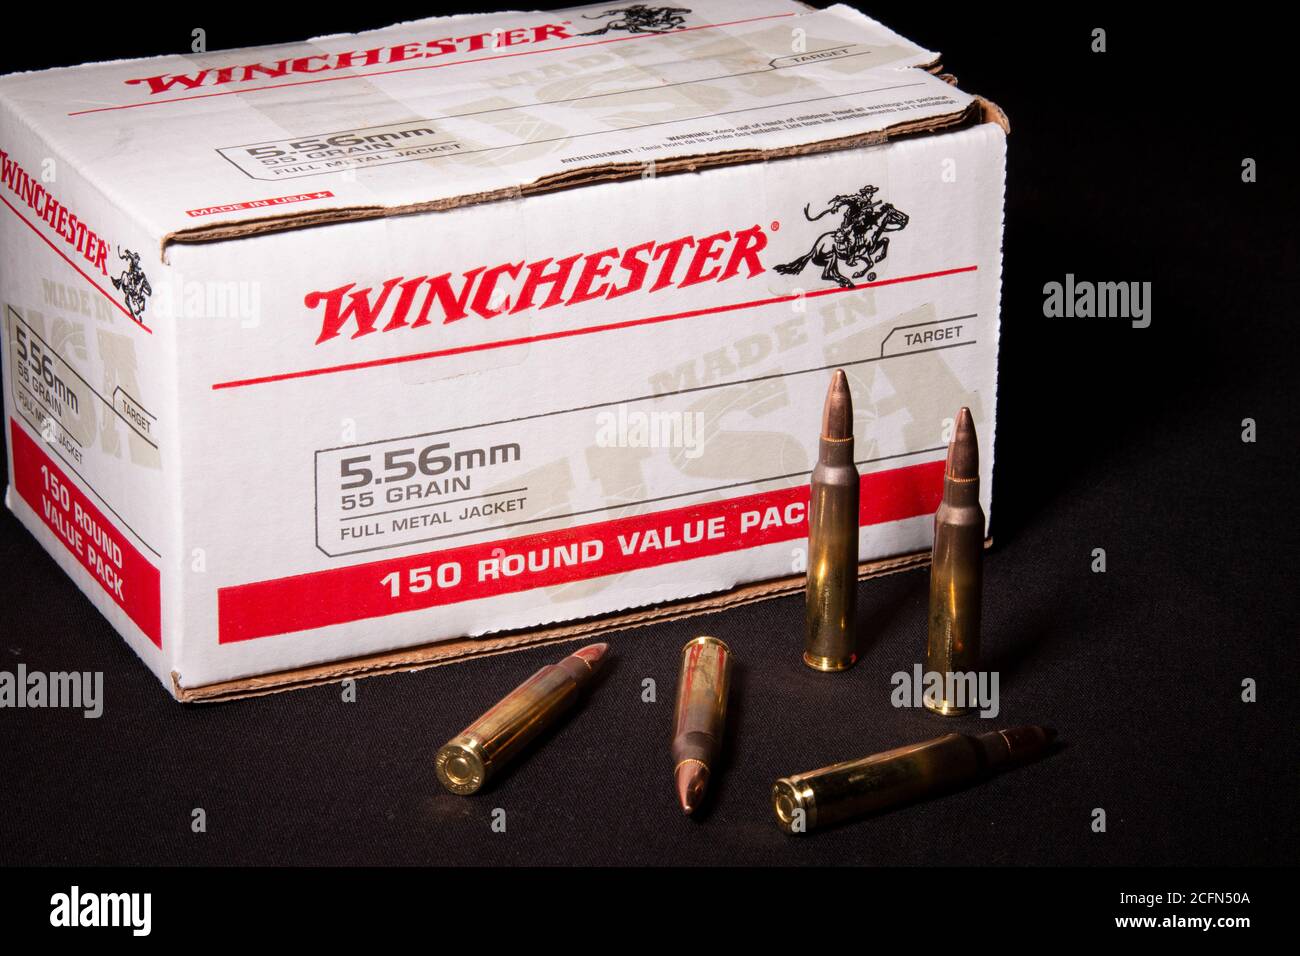 Winchester 150 Round Value Pack 5.56mm Stock Photo